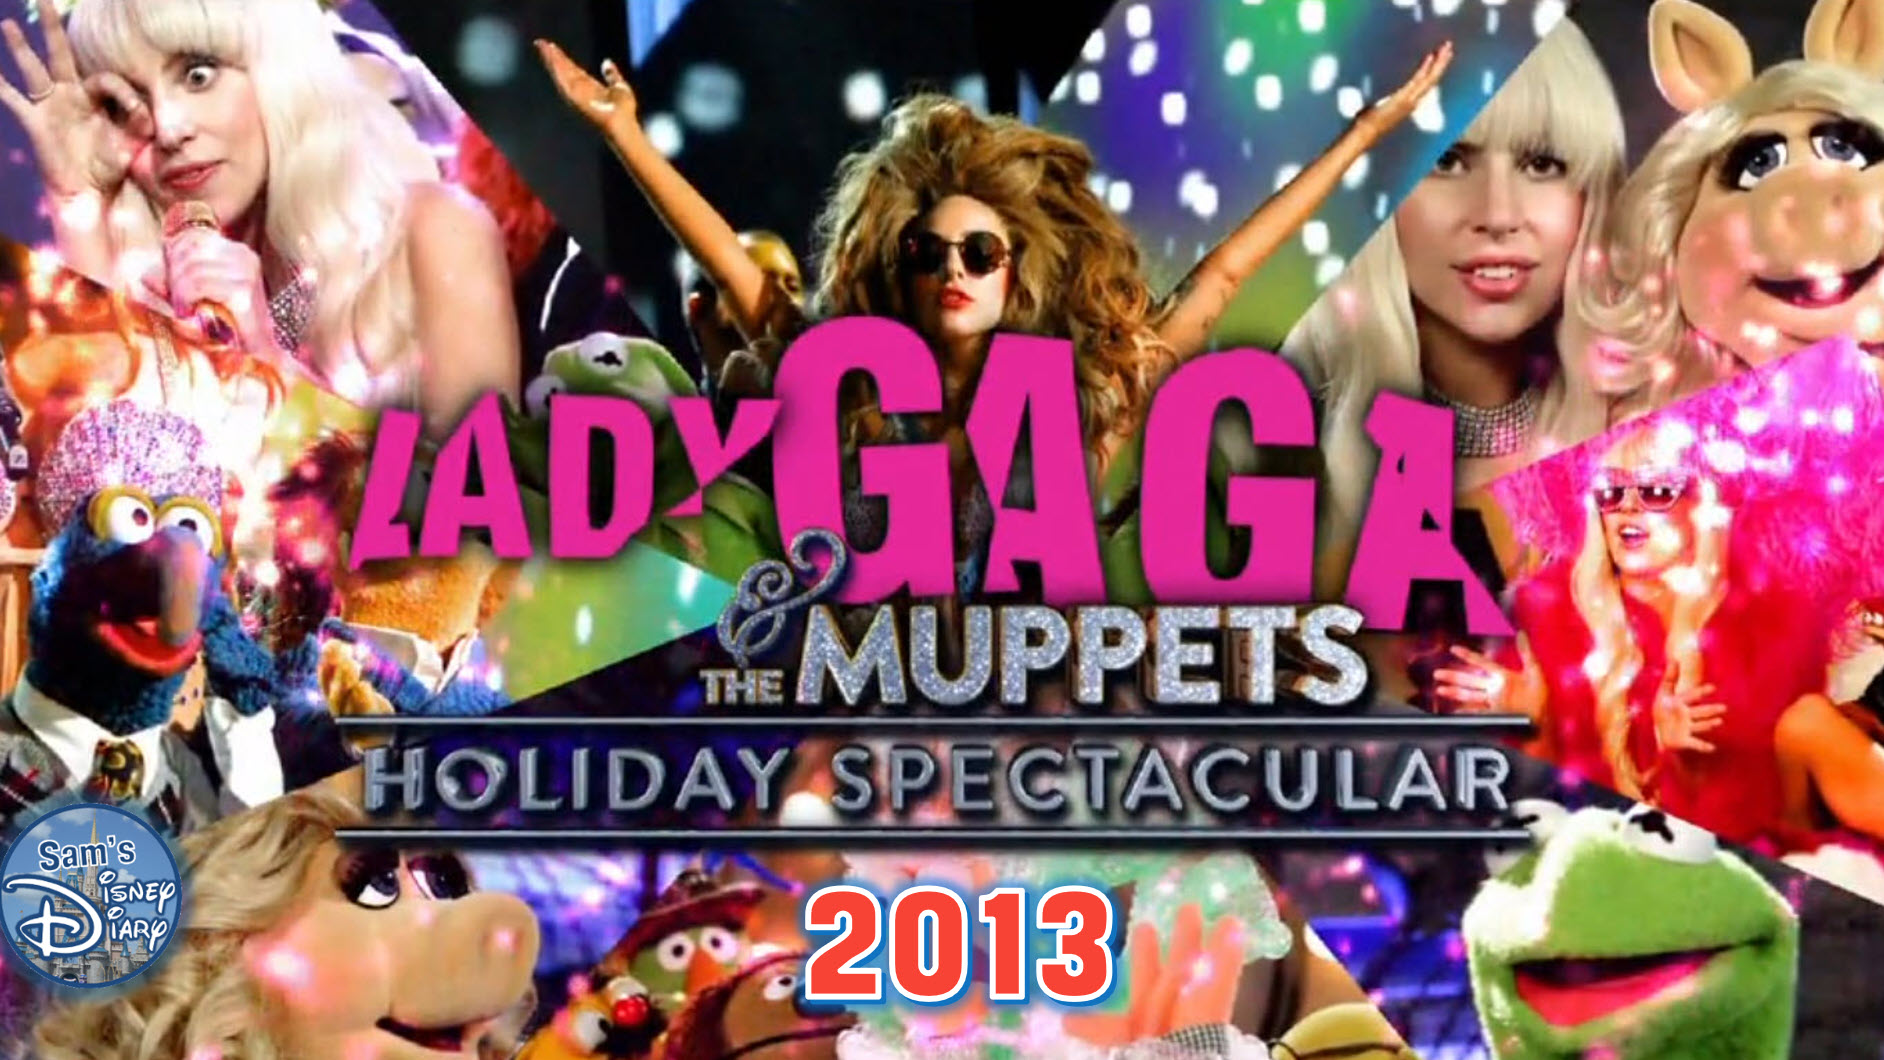 Lady Gaga and the Muppets Holiday Spectacular 2013